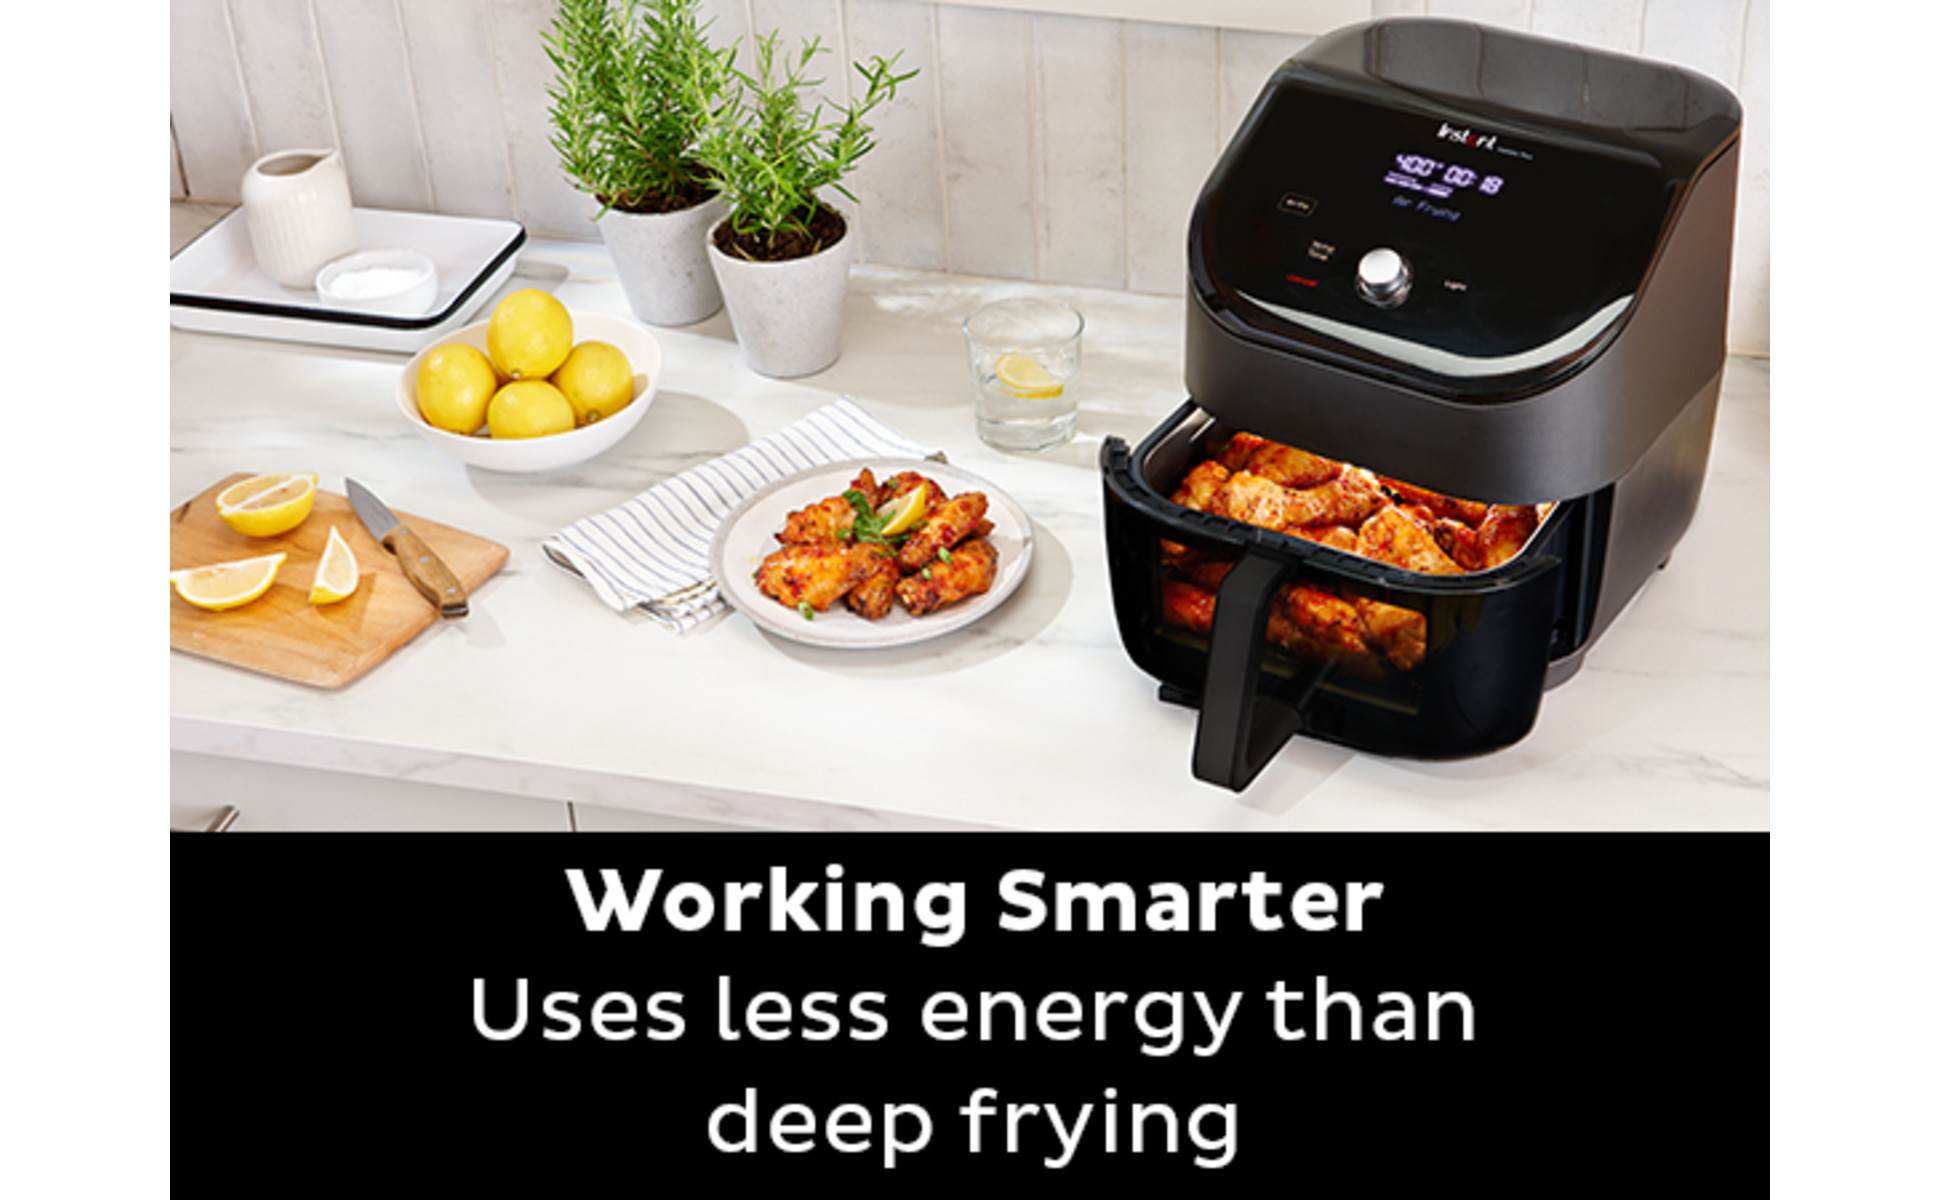 Instant Pot 6-Quart Air Fryer Oven, From the Makers of Instant with Odor  Erase Technology, ClearCook Cooking Window, App with over 100 Recipes,  Single Basket, Stainless Steel